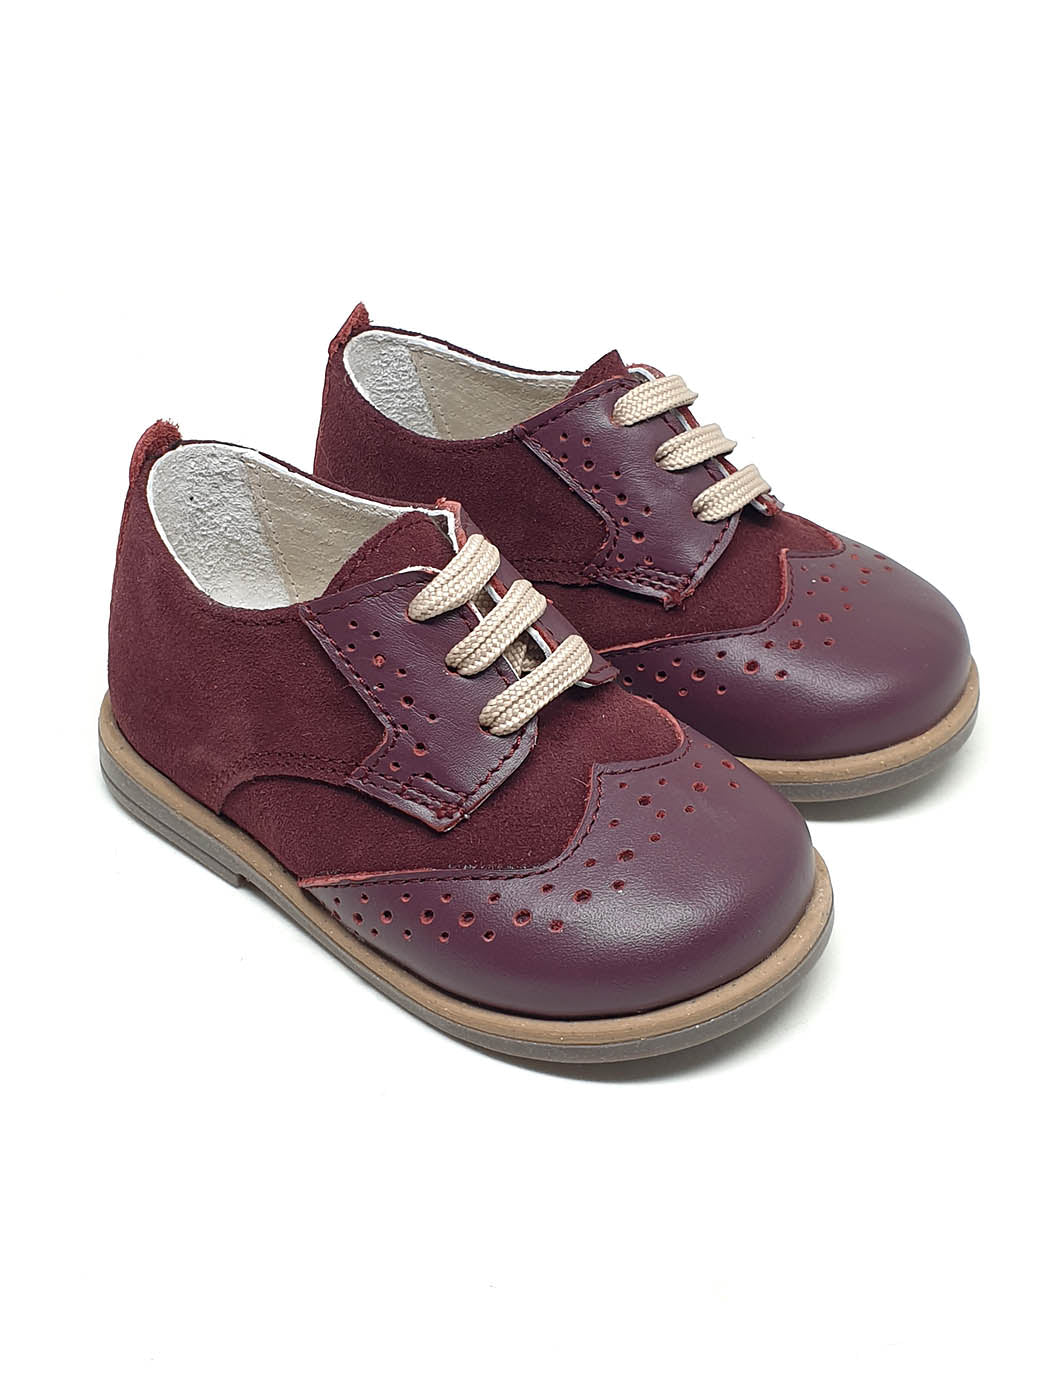 Baby Shoes Moccasins for boy - Burgundy